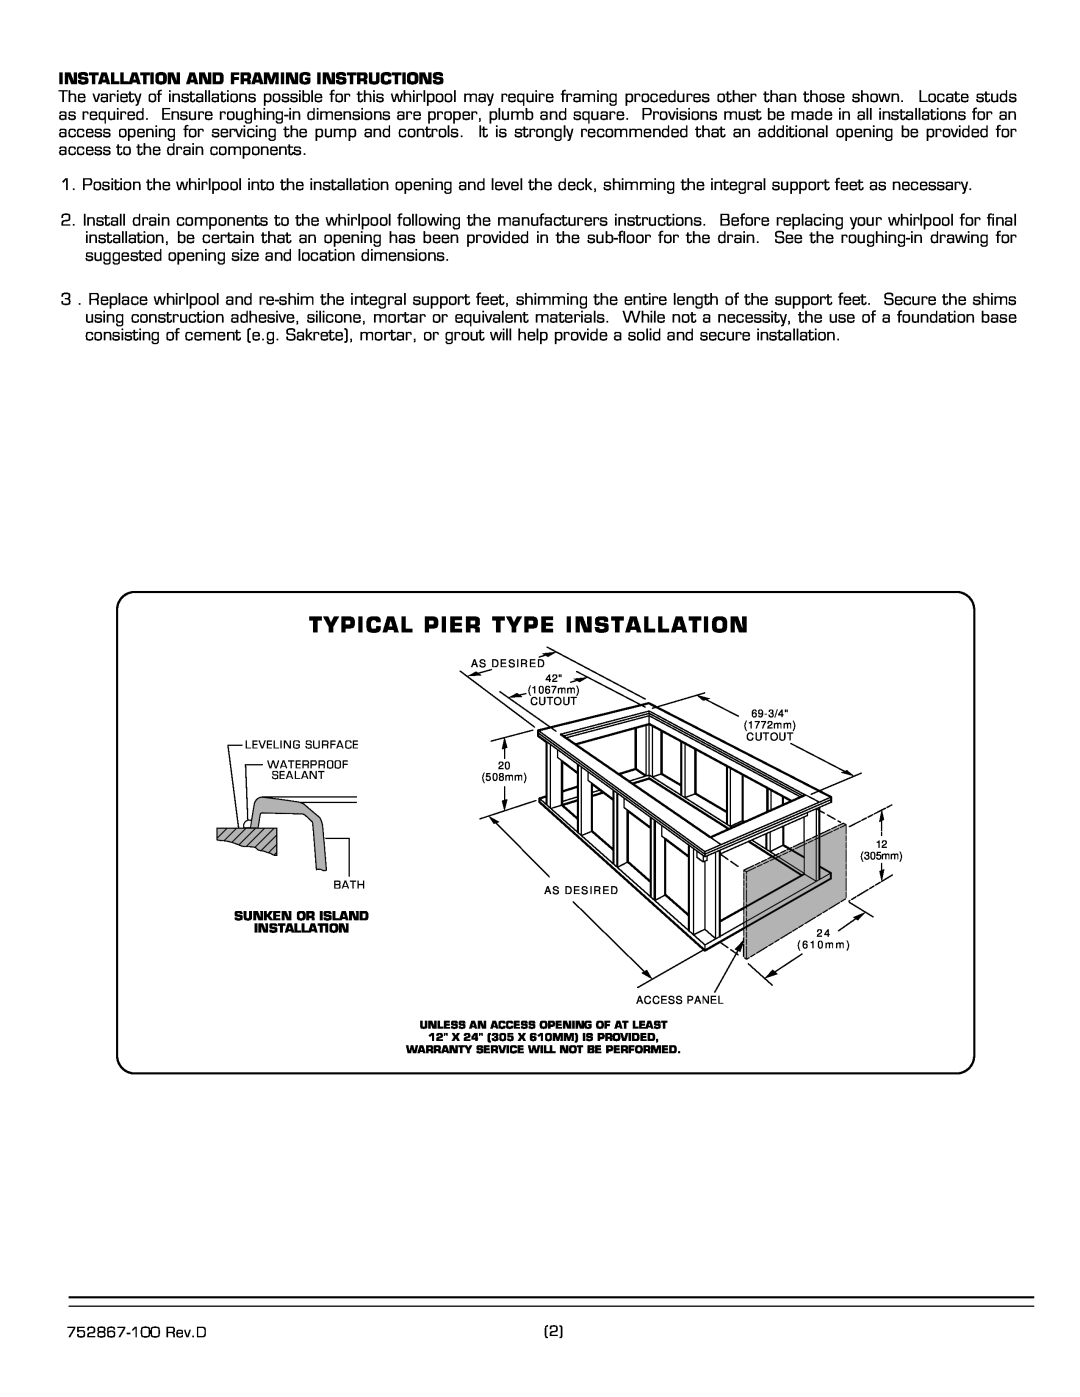 American Standard 2901E SERIES Typical Pier Type Installation, Installation And Framing Instructions 